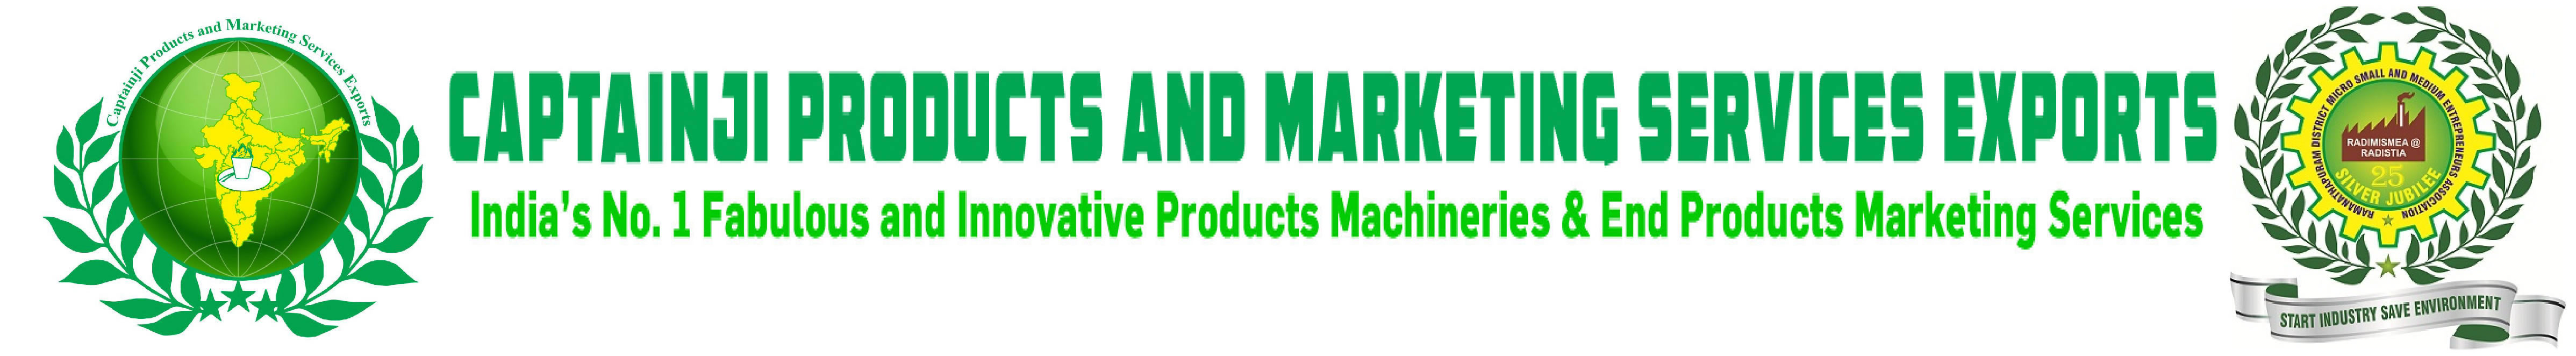 Captianji Products and Marketing Services Exports